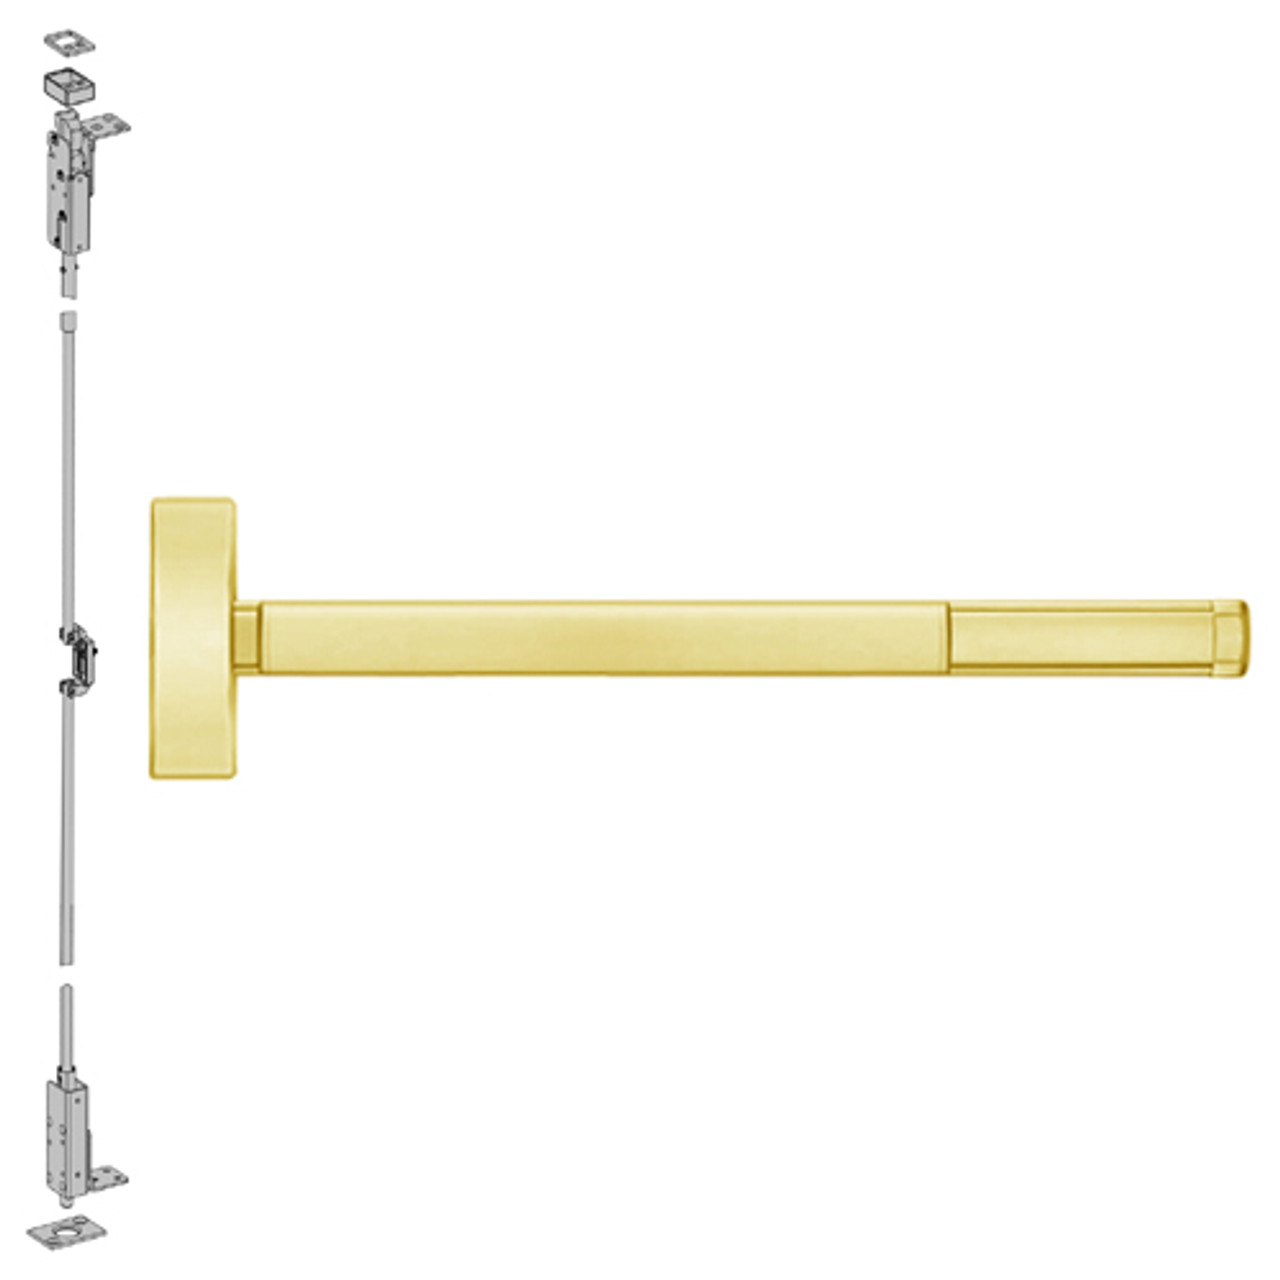 FL2702-605-36 PHI 2700 Series Fire Rated Wood Door Concealed Vertical Exit Device Prepped for Dummy Trim in Bright Brass Finish